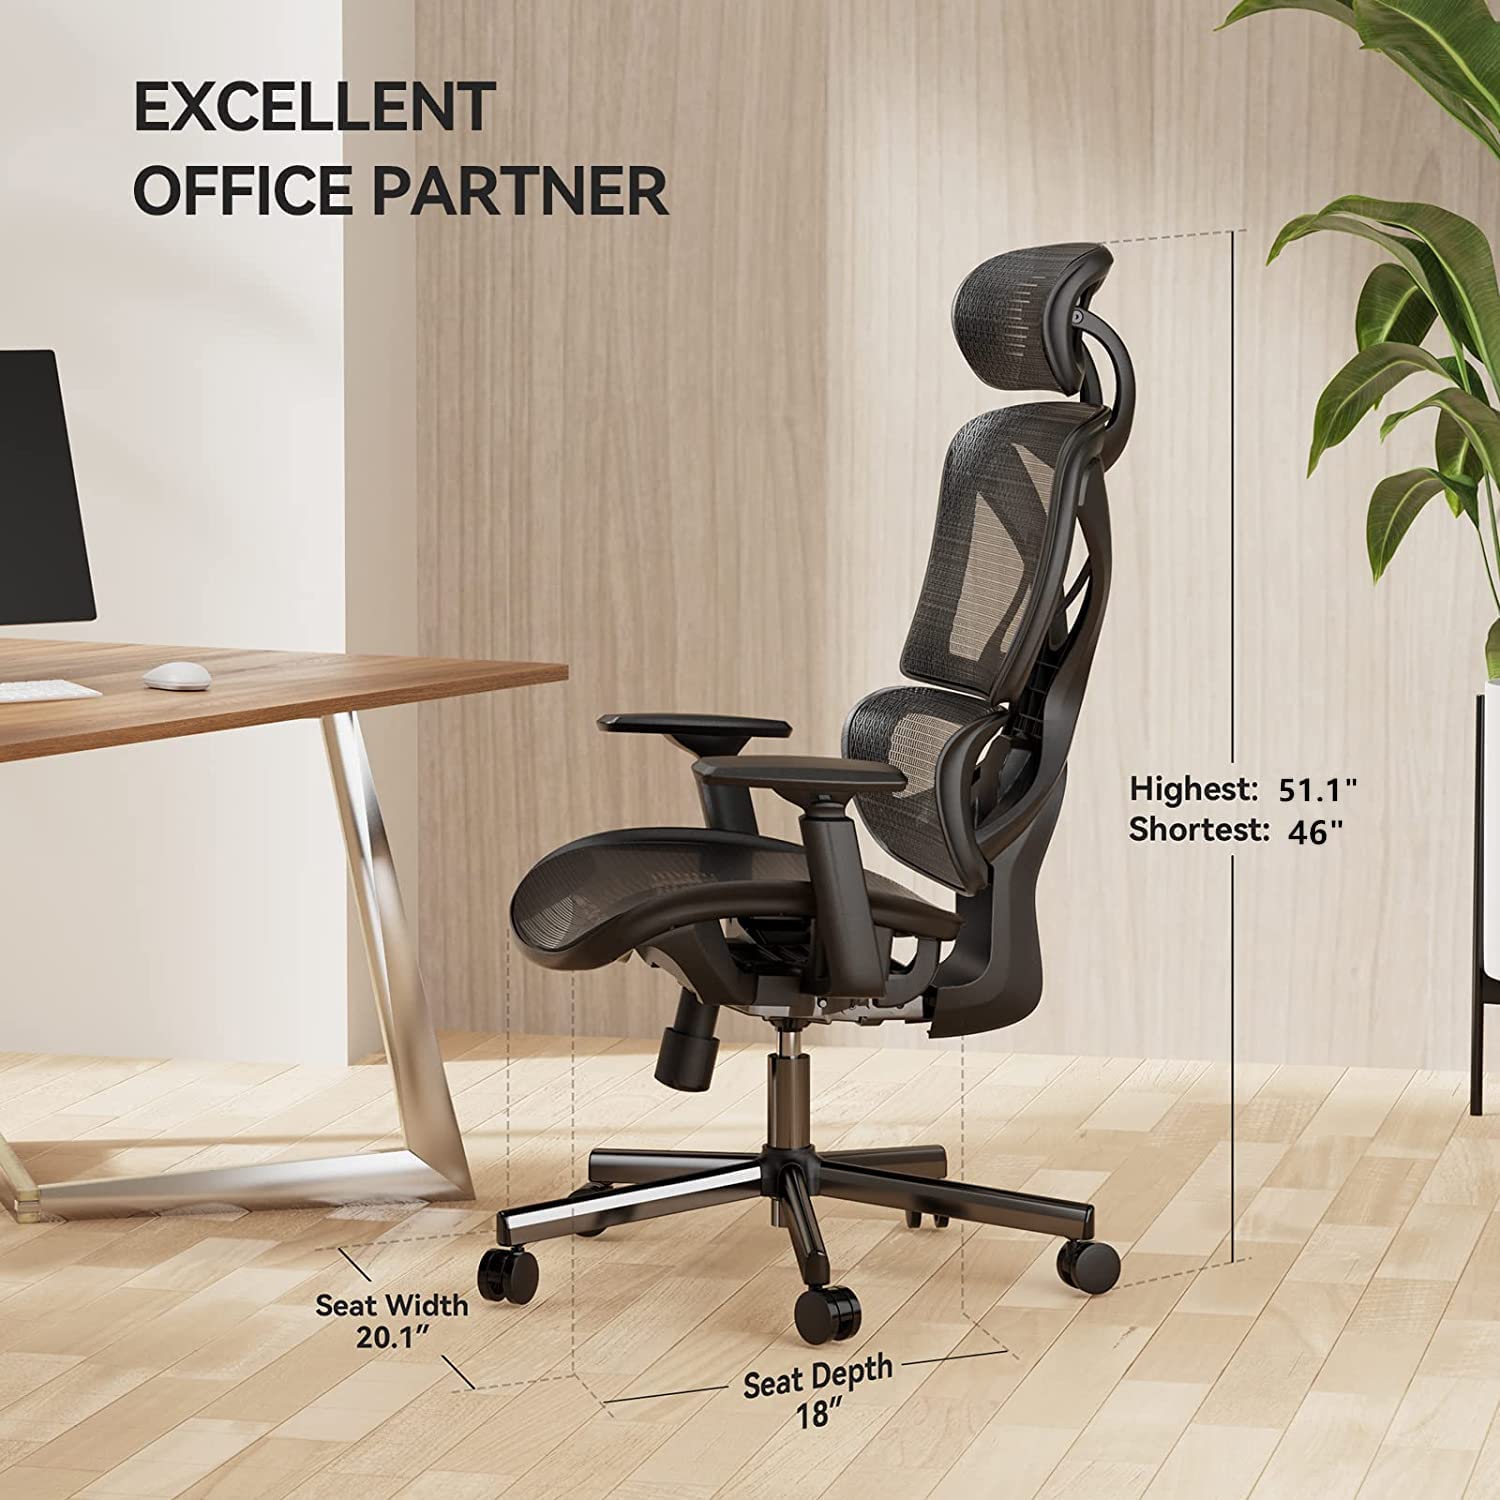 The 18 Best Office Chairs for Posture Correction